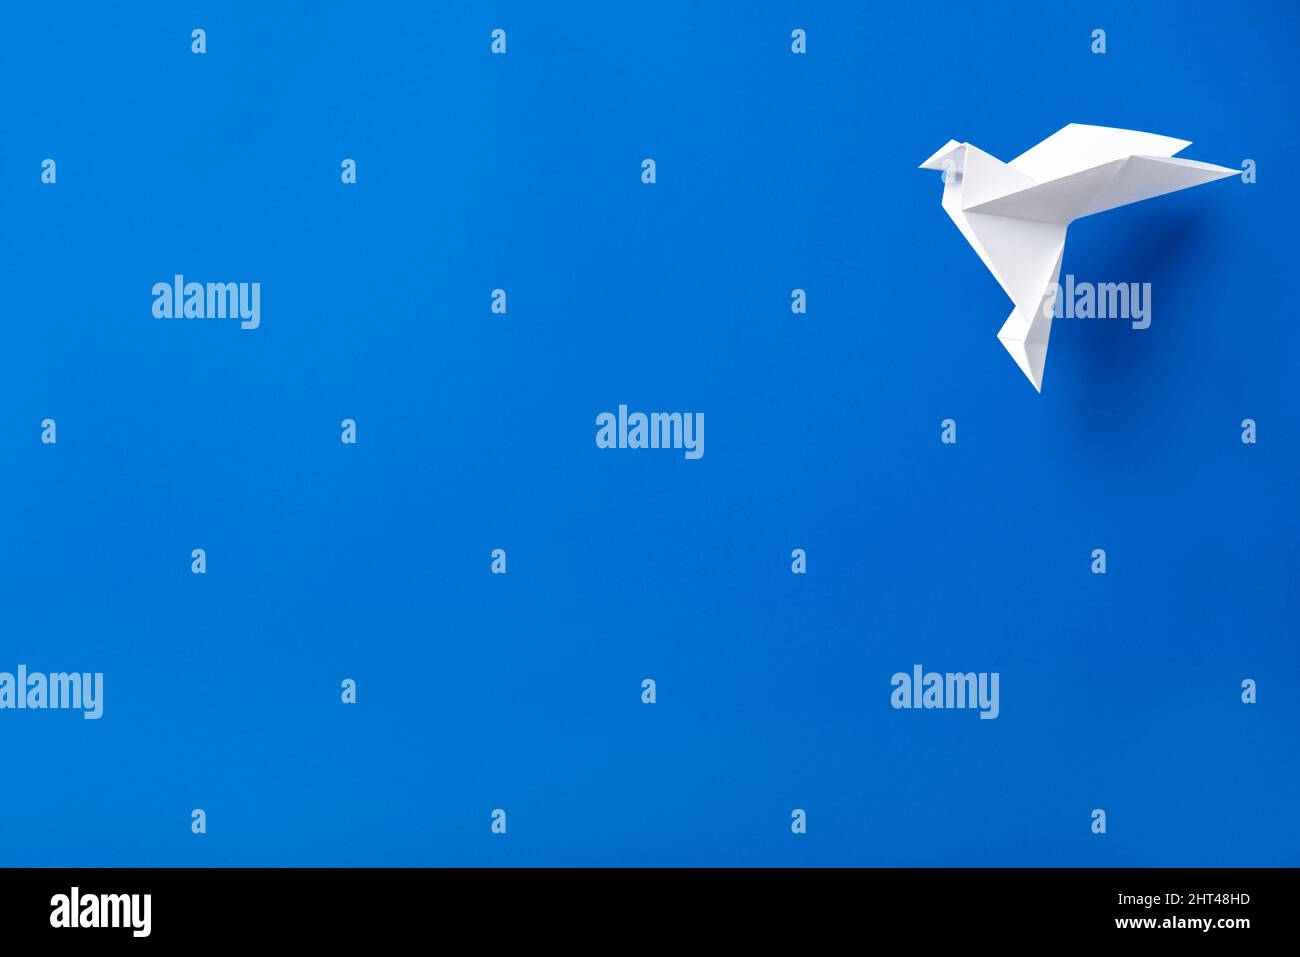 White origami paper dove flying against a blue background. Stock Photo